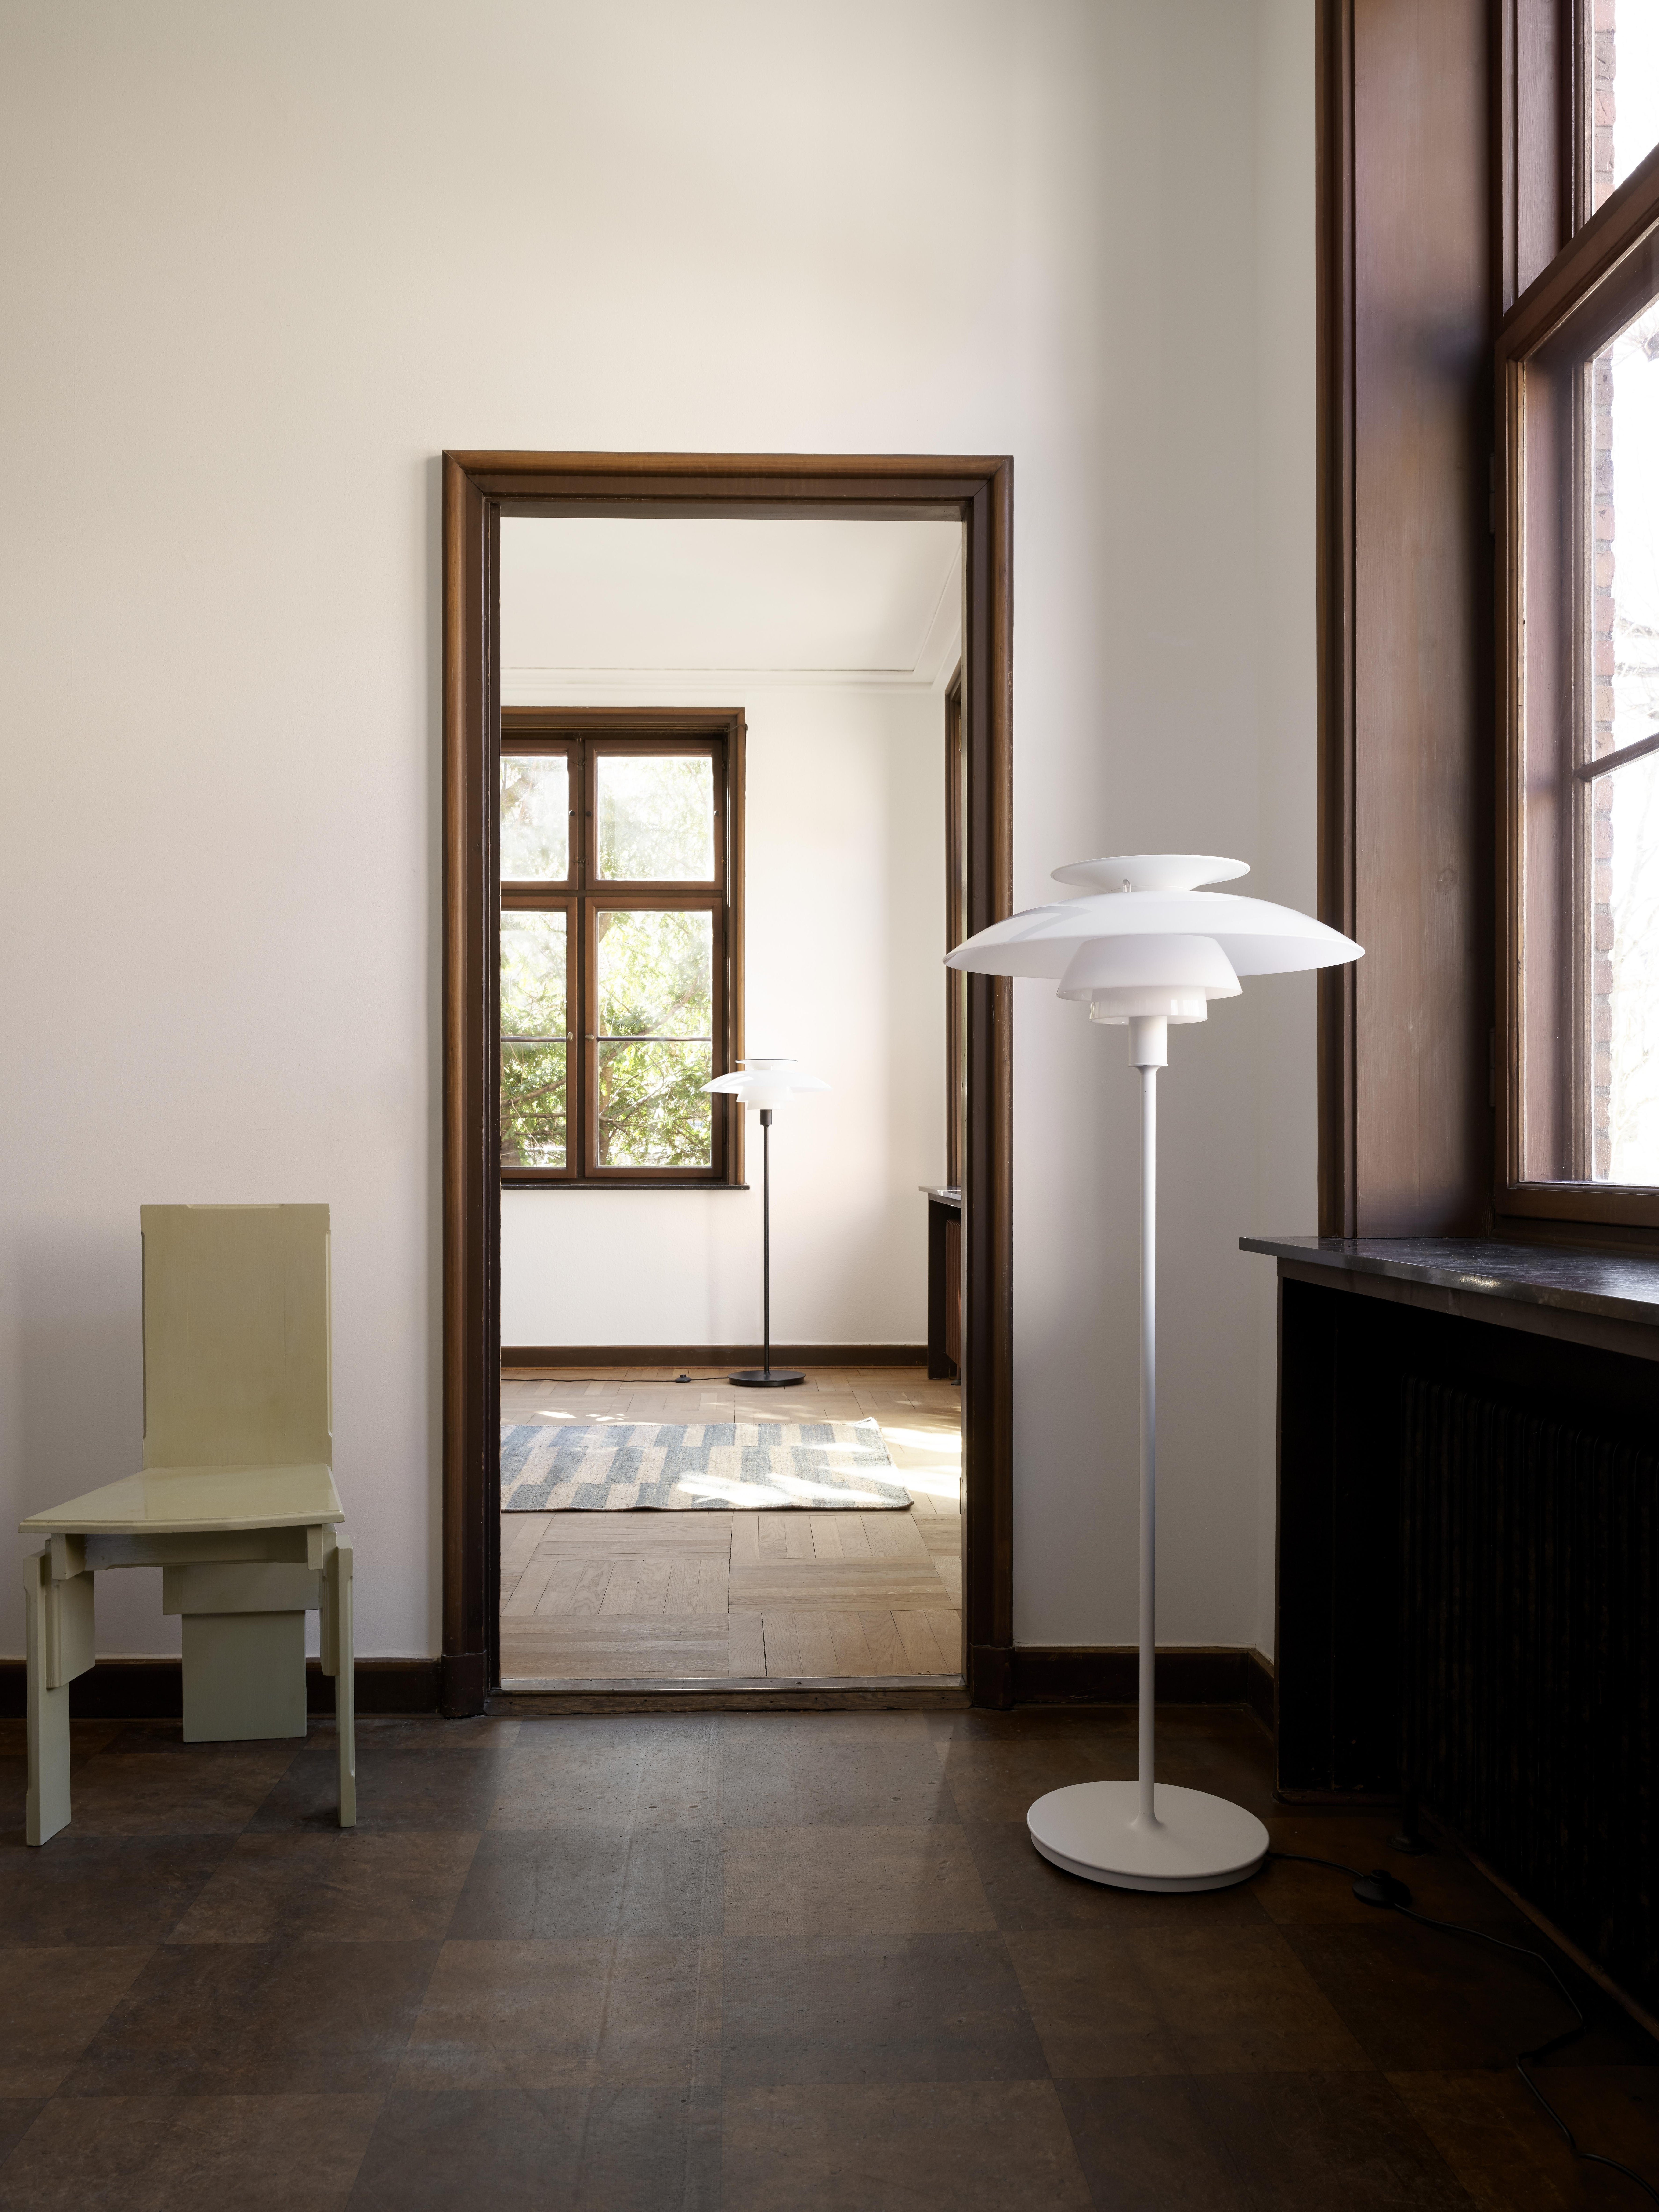 Poul Henningsen PH 80 floor lamp for Louis Poulsen in White. 

The PH 80 was put into production after Henningsen's death, as a celebration of what would have been his 80th birthday. A designer focused on the future, Henningsen had been working